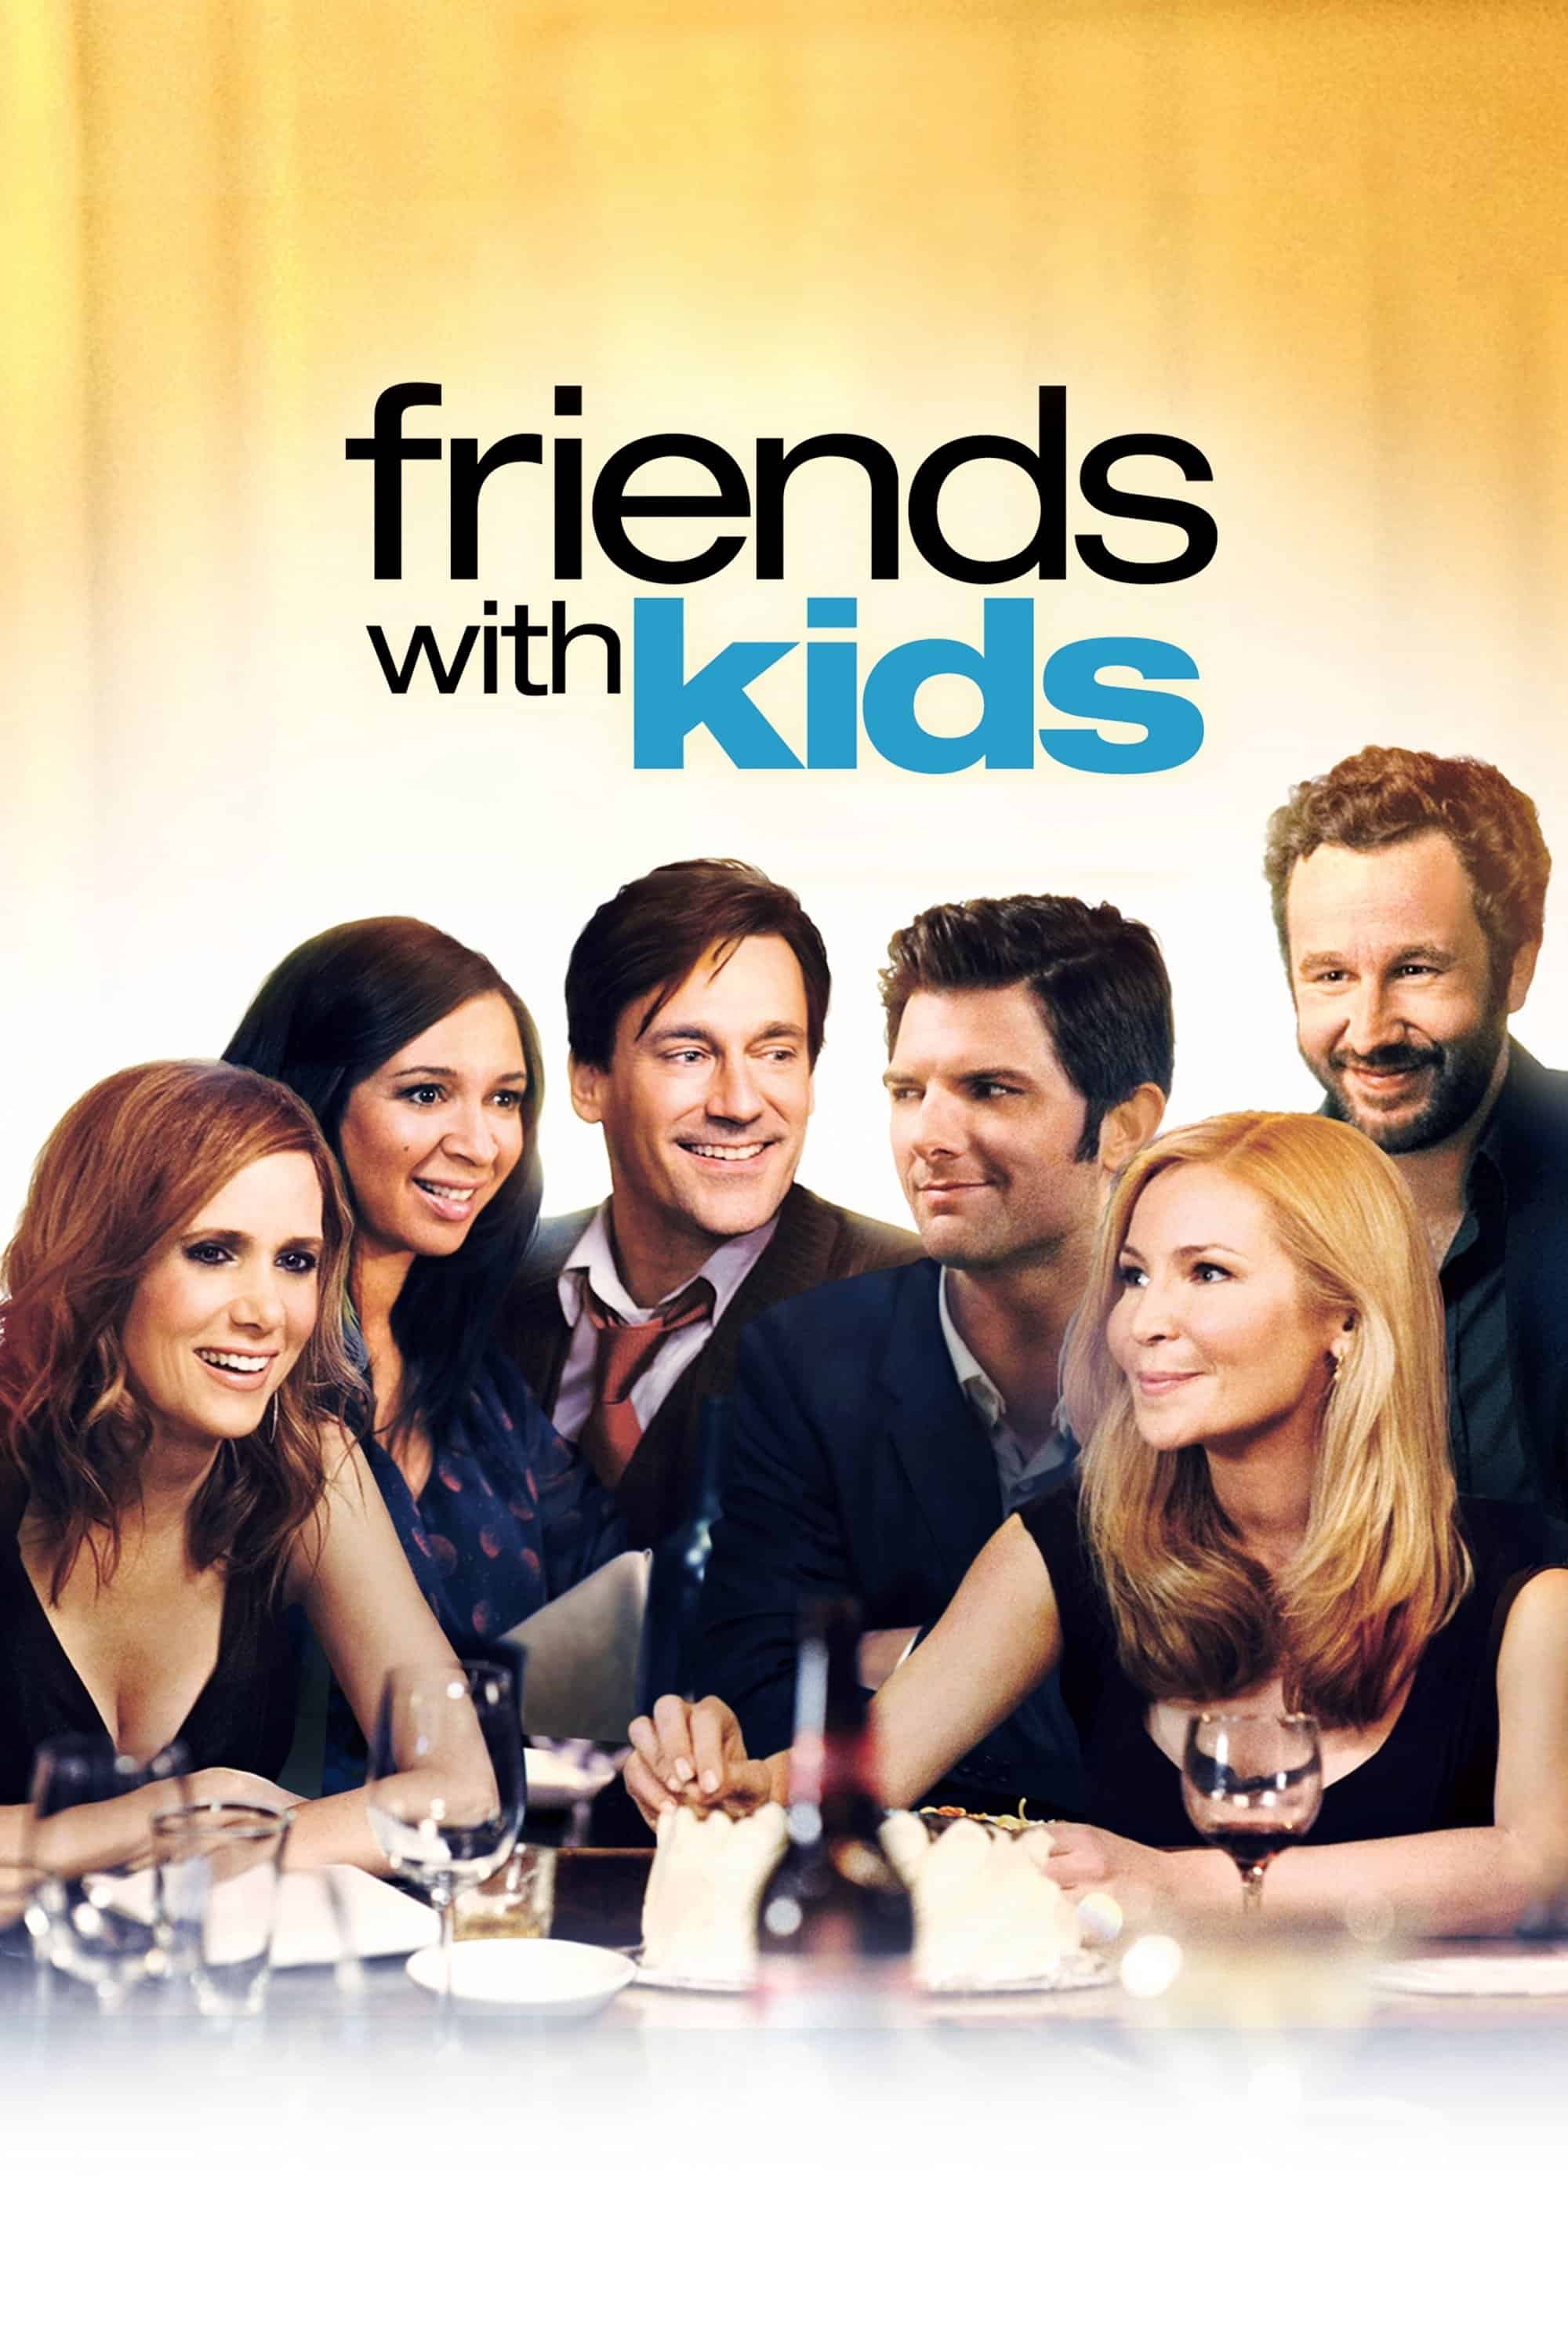 Friends with Kids, 2011 